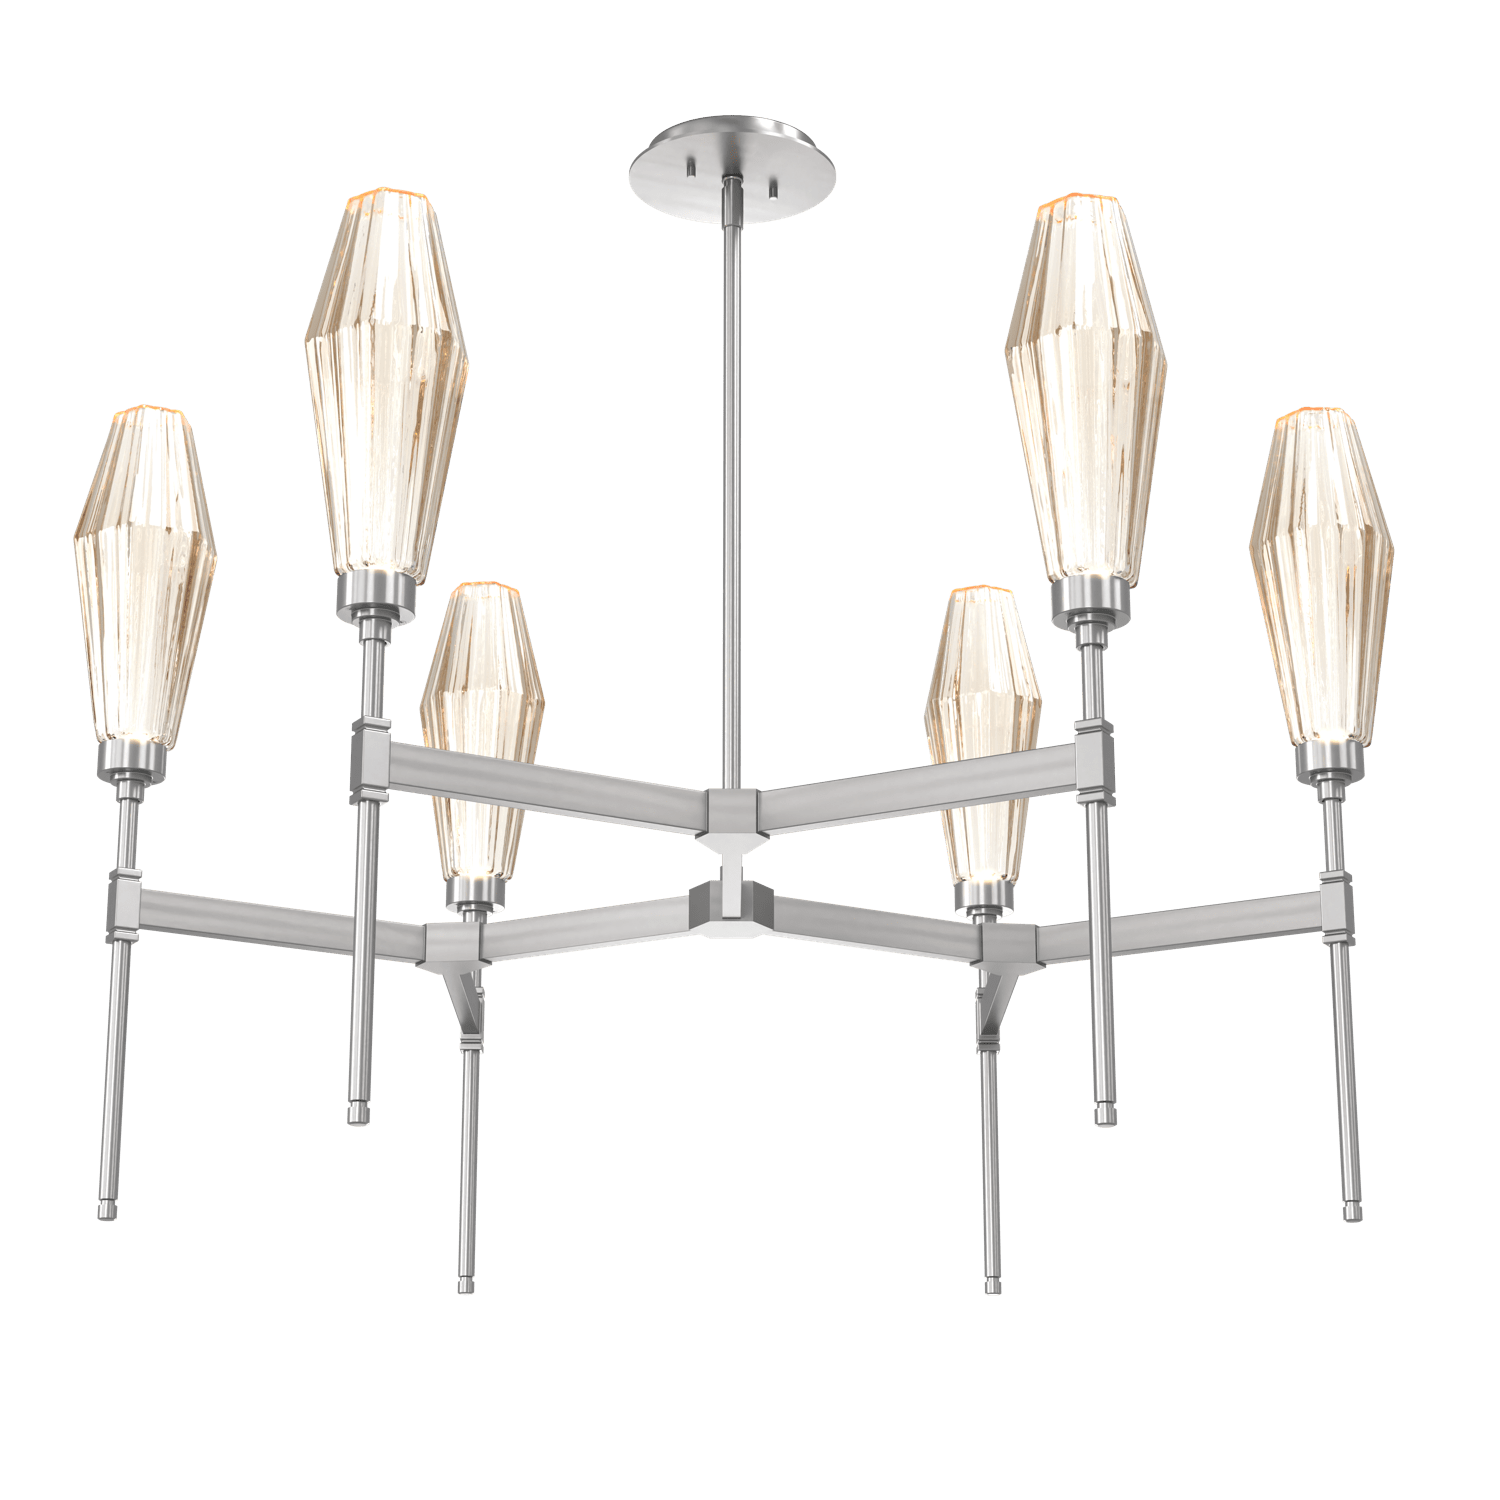 CHB0049-37-SN-RA-Hammerton-Studio-Aalto-37-inch-round-belvedere-chandelier-with-satin-nickel-finish-and-optic-ribbed-amber-glass-shades-and-LED-lamping